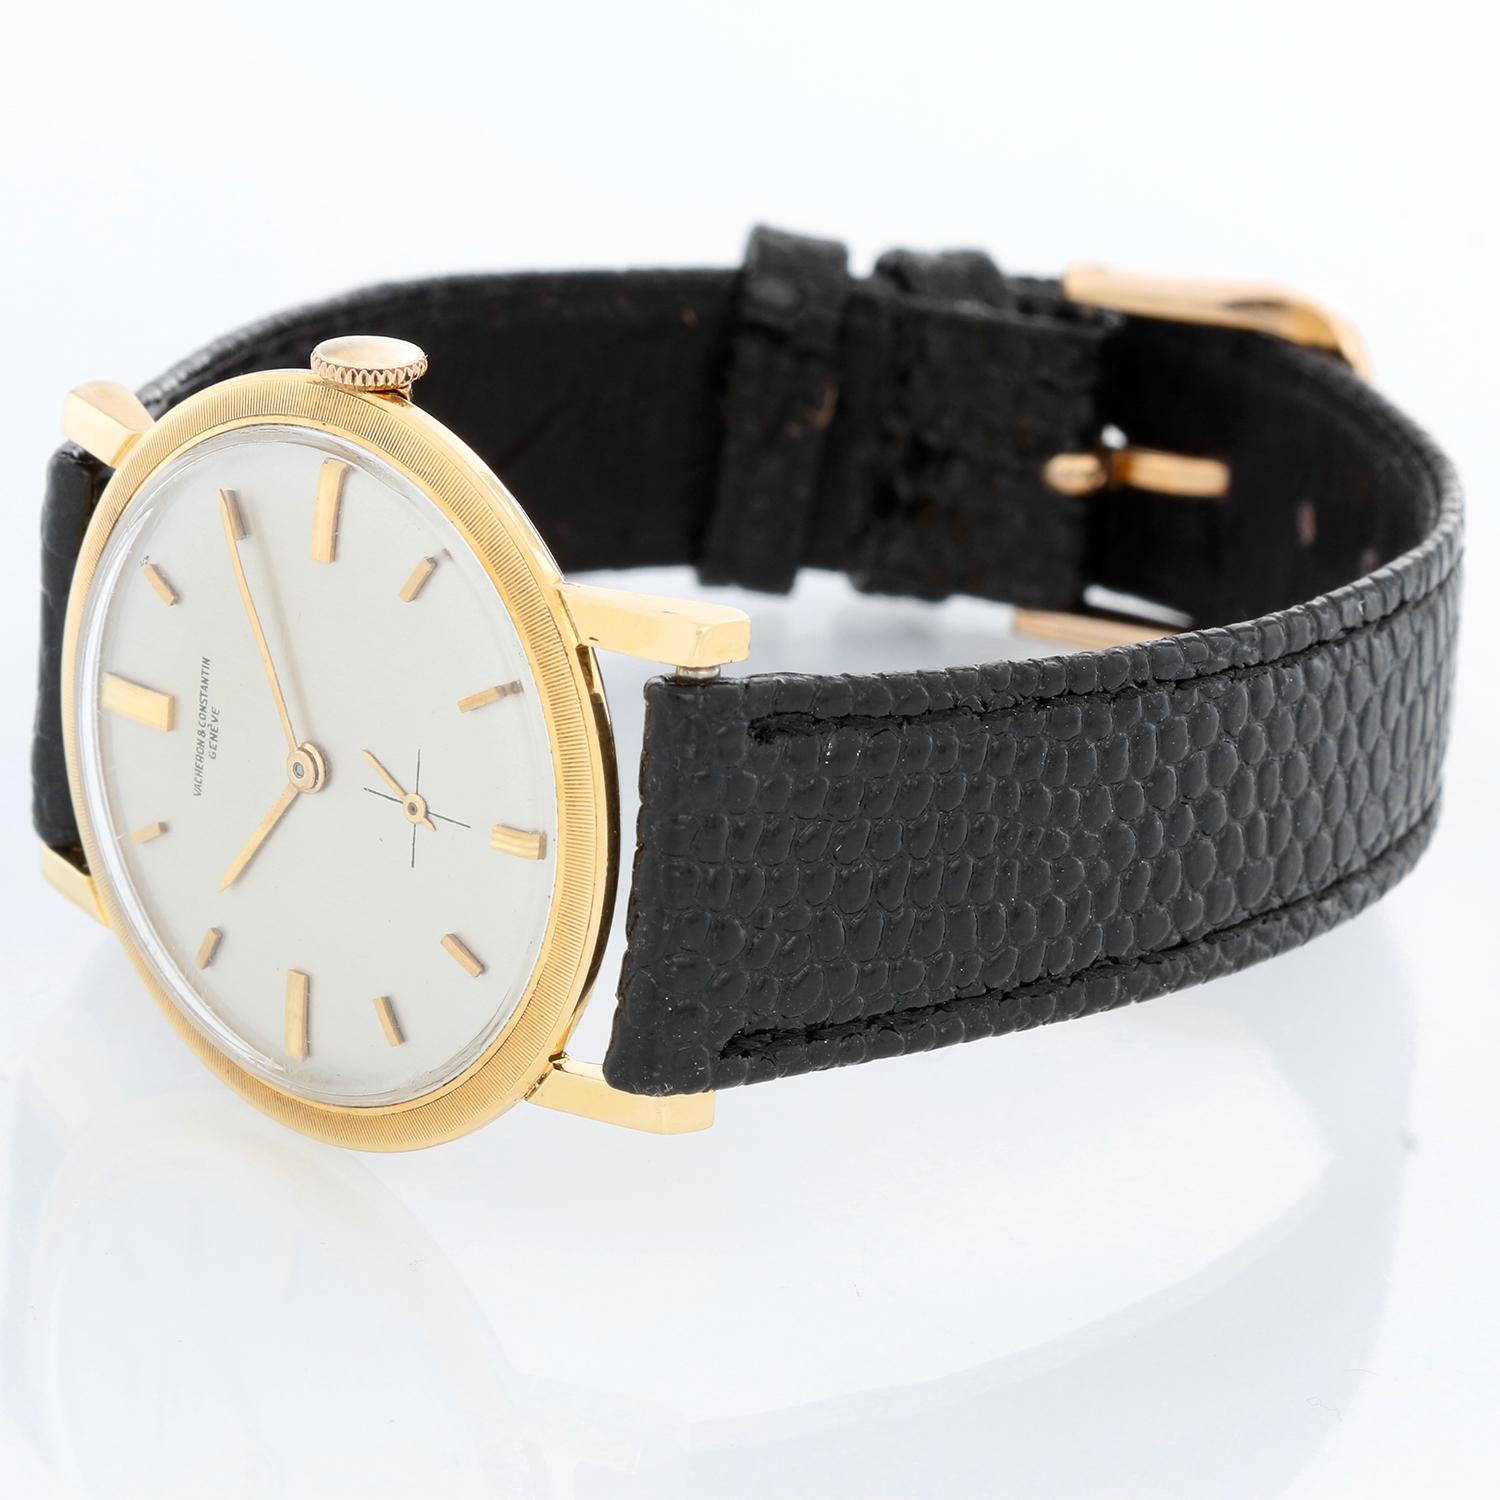 Vintage Vacheron Constantin 18k Yellow Gold Men's Watch - Manual winding. 18k yellow gold case (32mm diameter). Silver dial with stick markers. Black leather strap with tang buckle . Vintage, pre-owned, with custom box. Circa 1950's-60's.